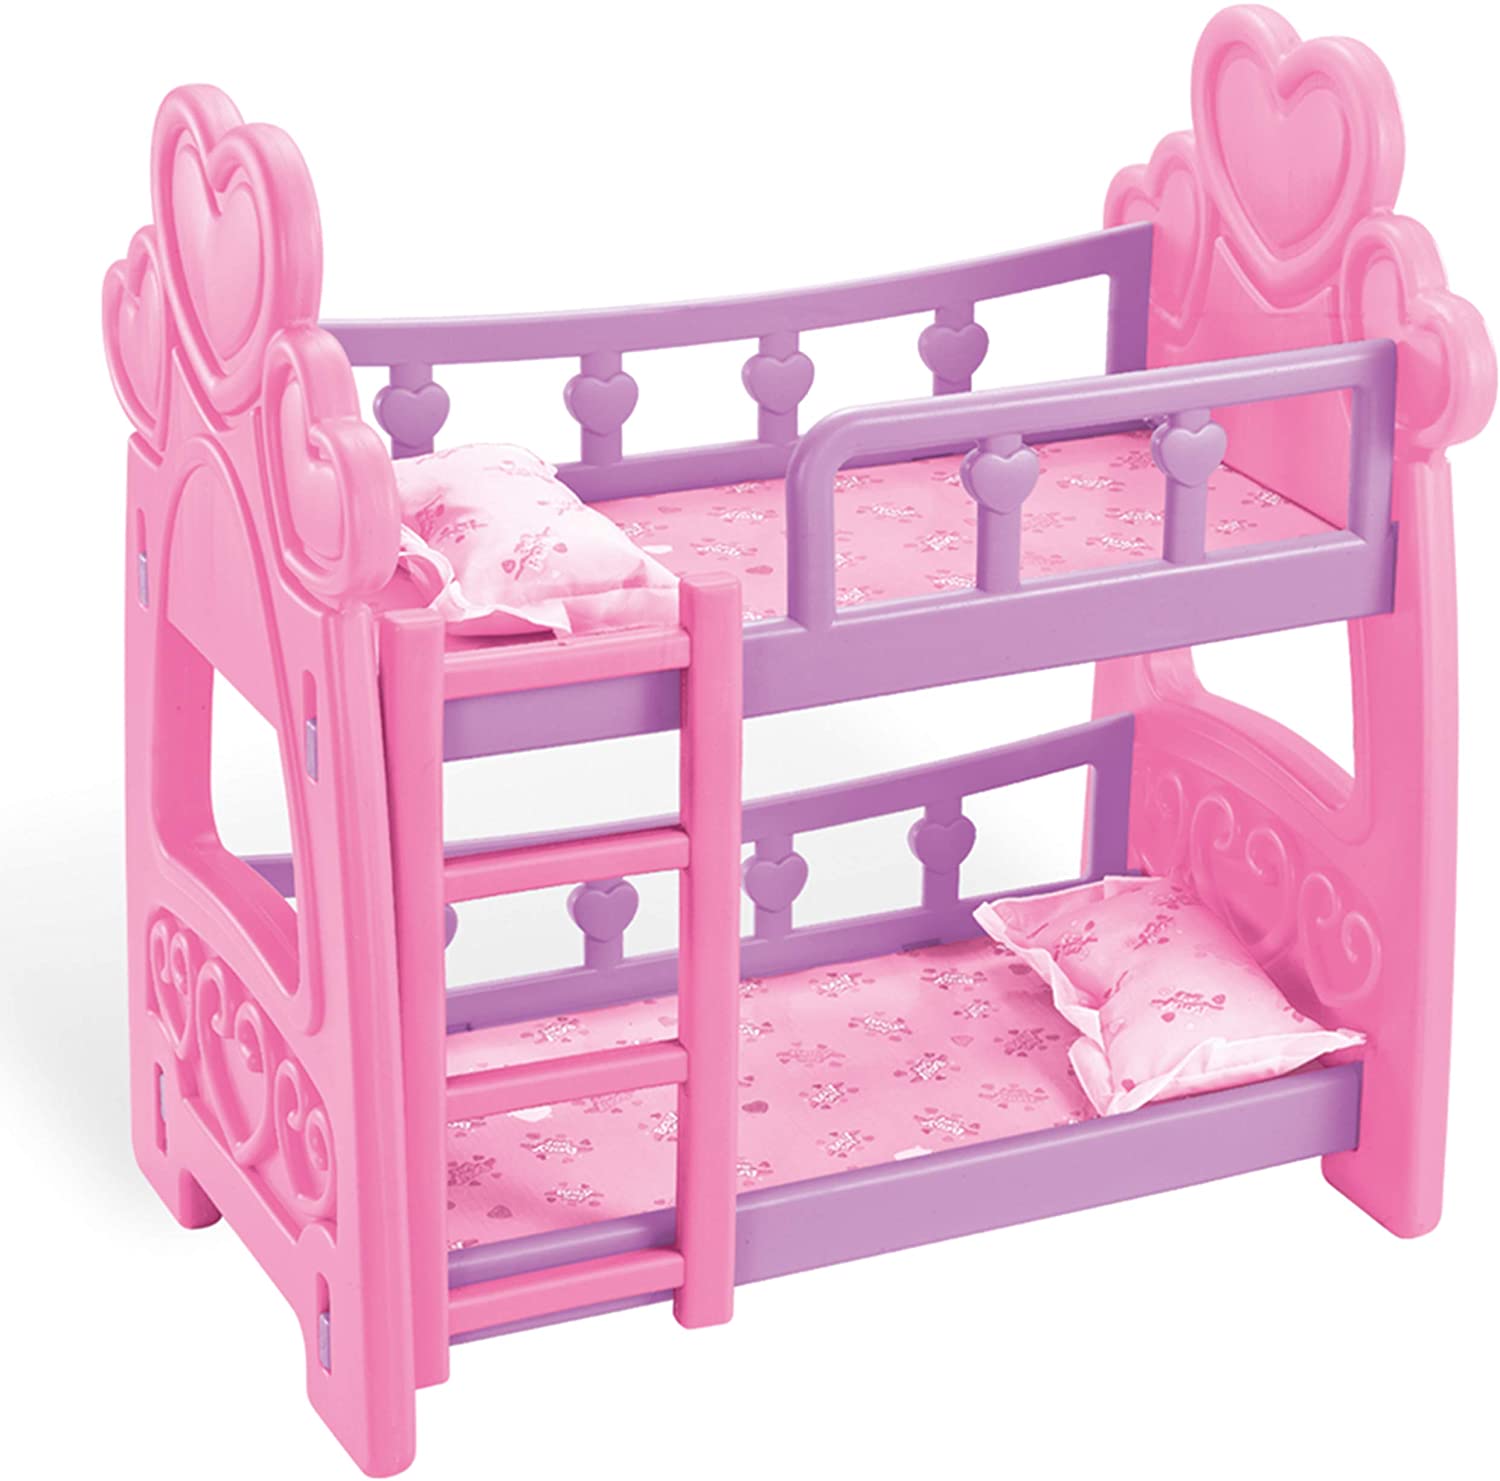 Hiliroom Dolls Bunk Beds 18, Wooden Baby Doll Bunk Bed